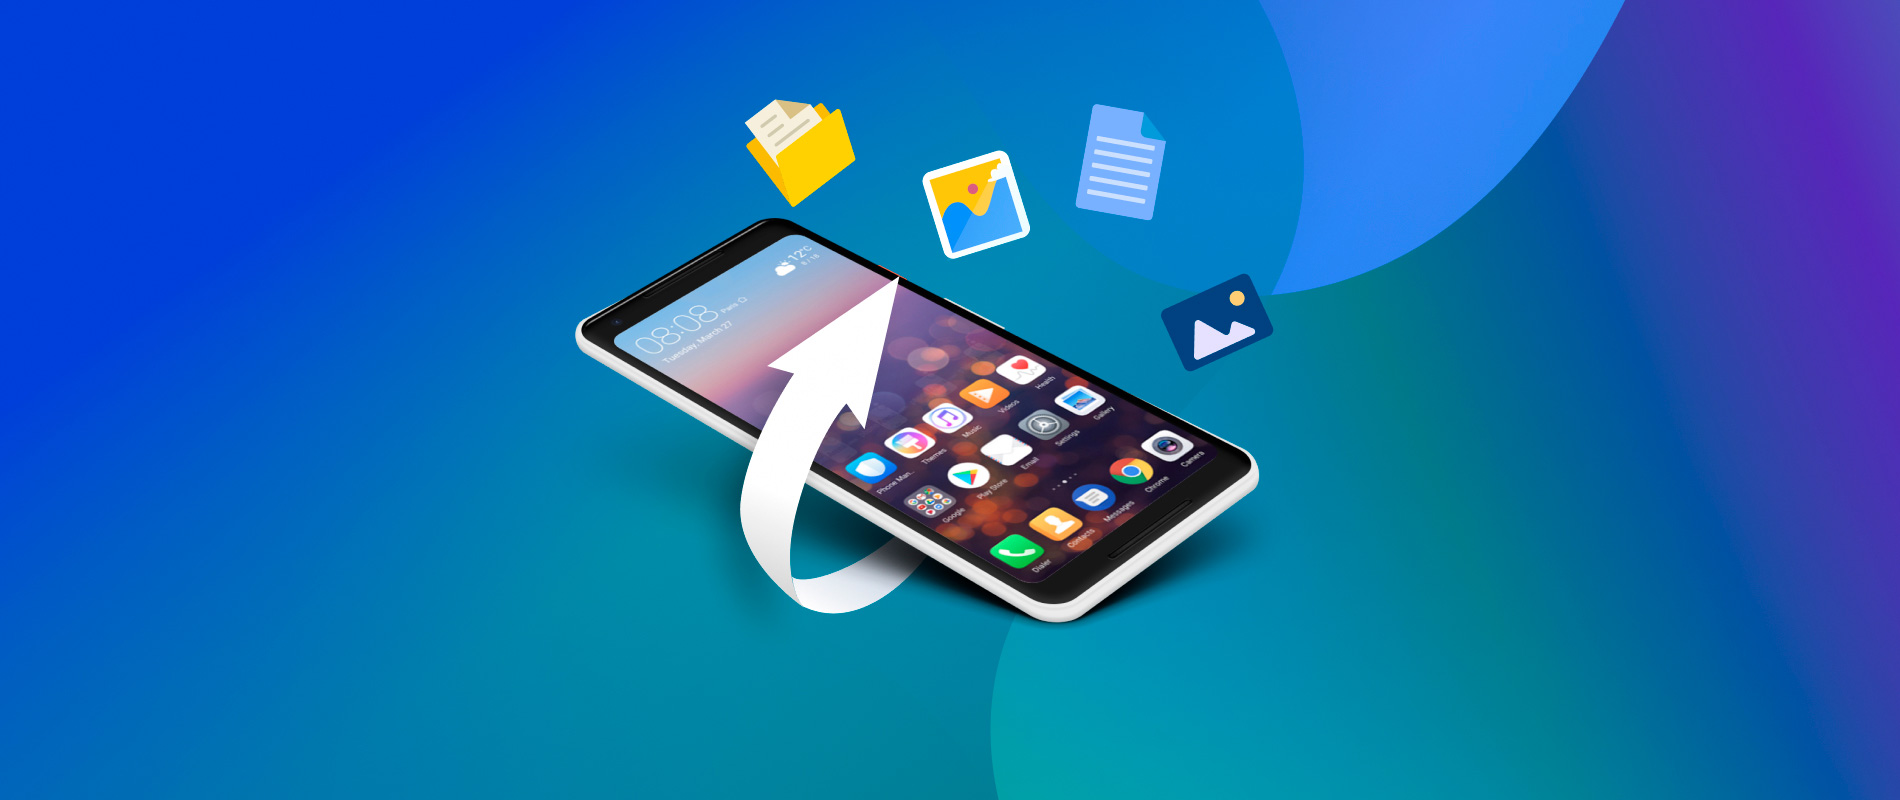 10 Proven Ways to Recover Deleted Files on Android (2022)